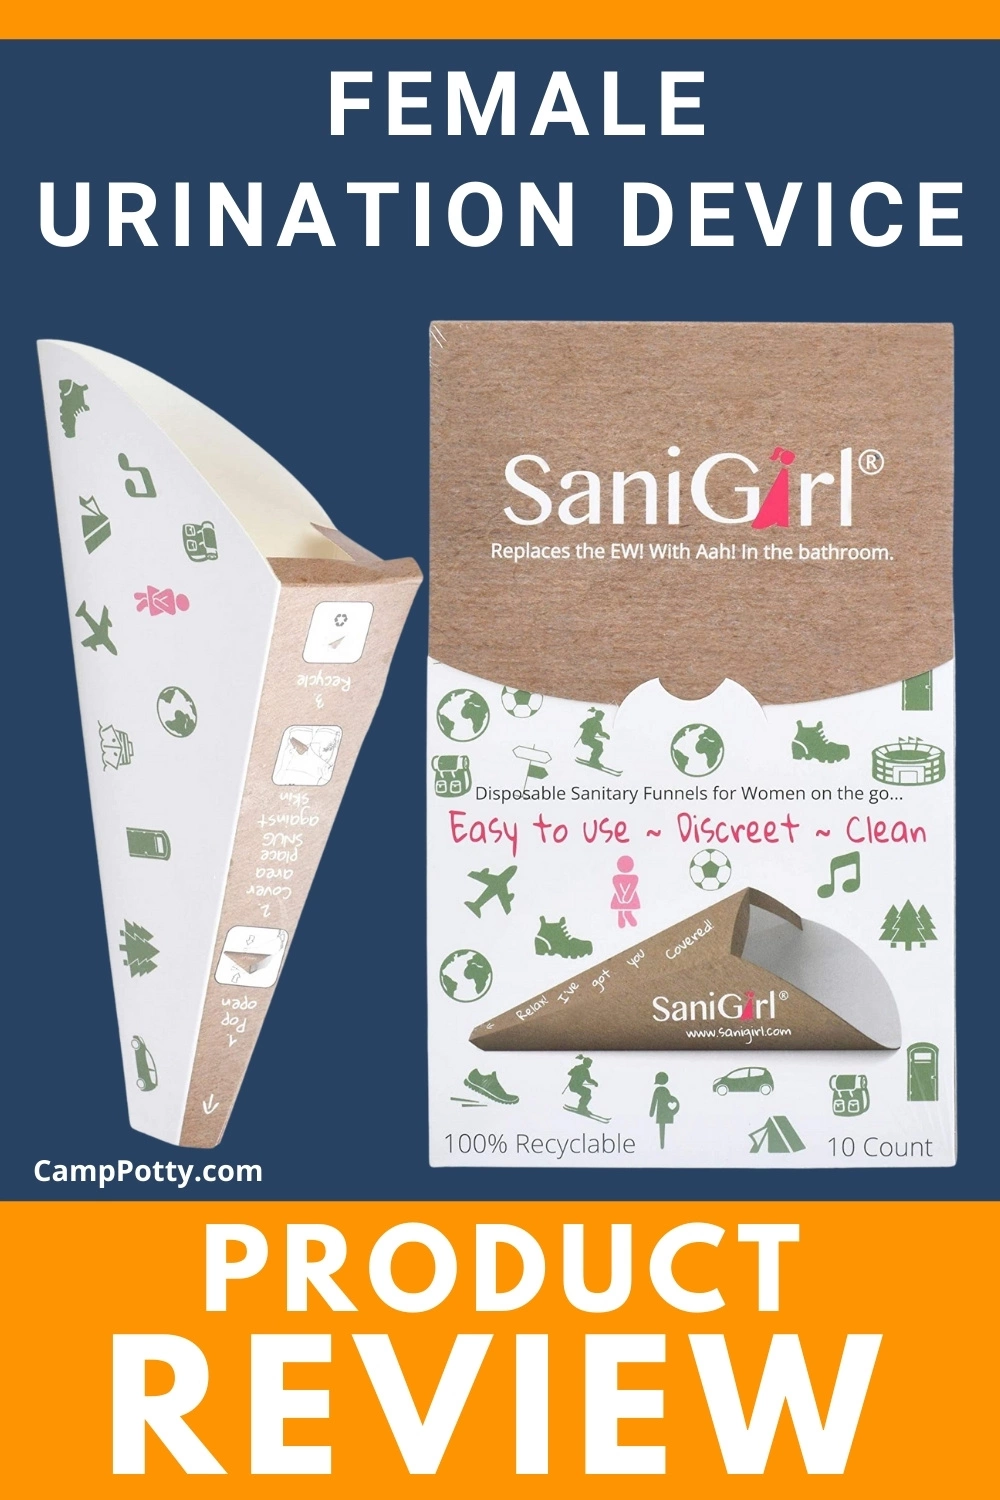 SaniGirl Disposable Female Urination Device Review